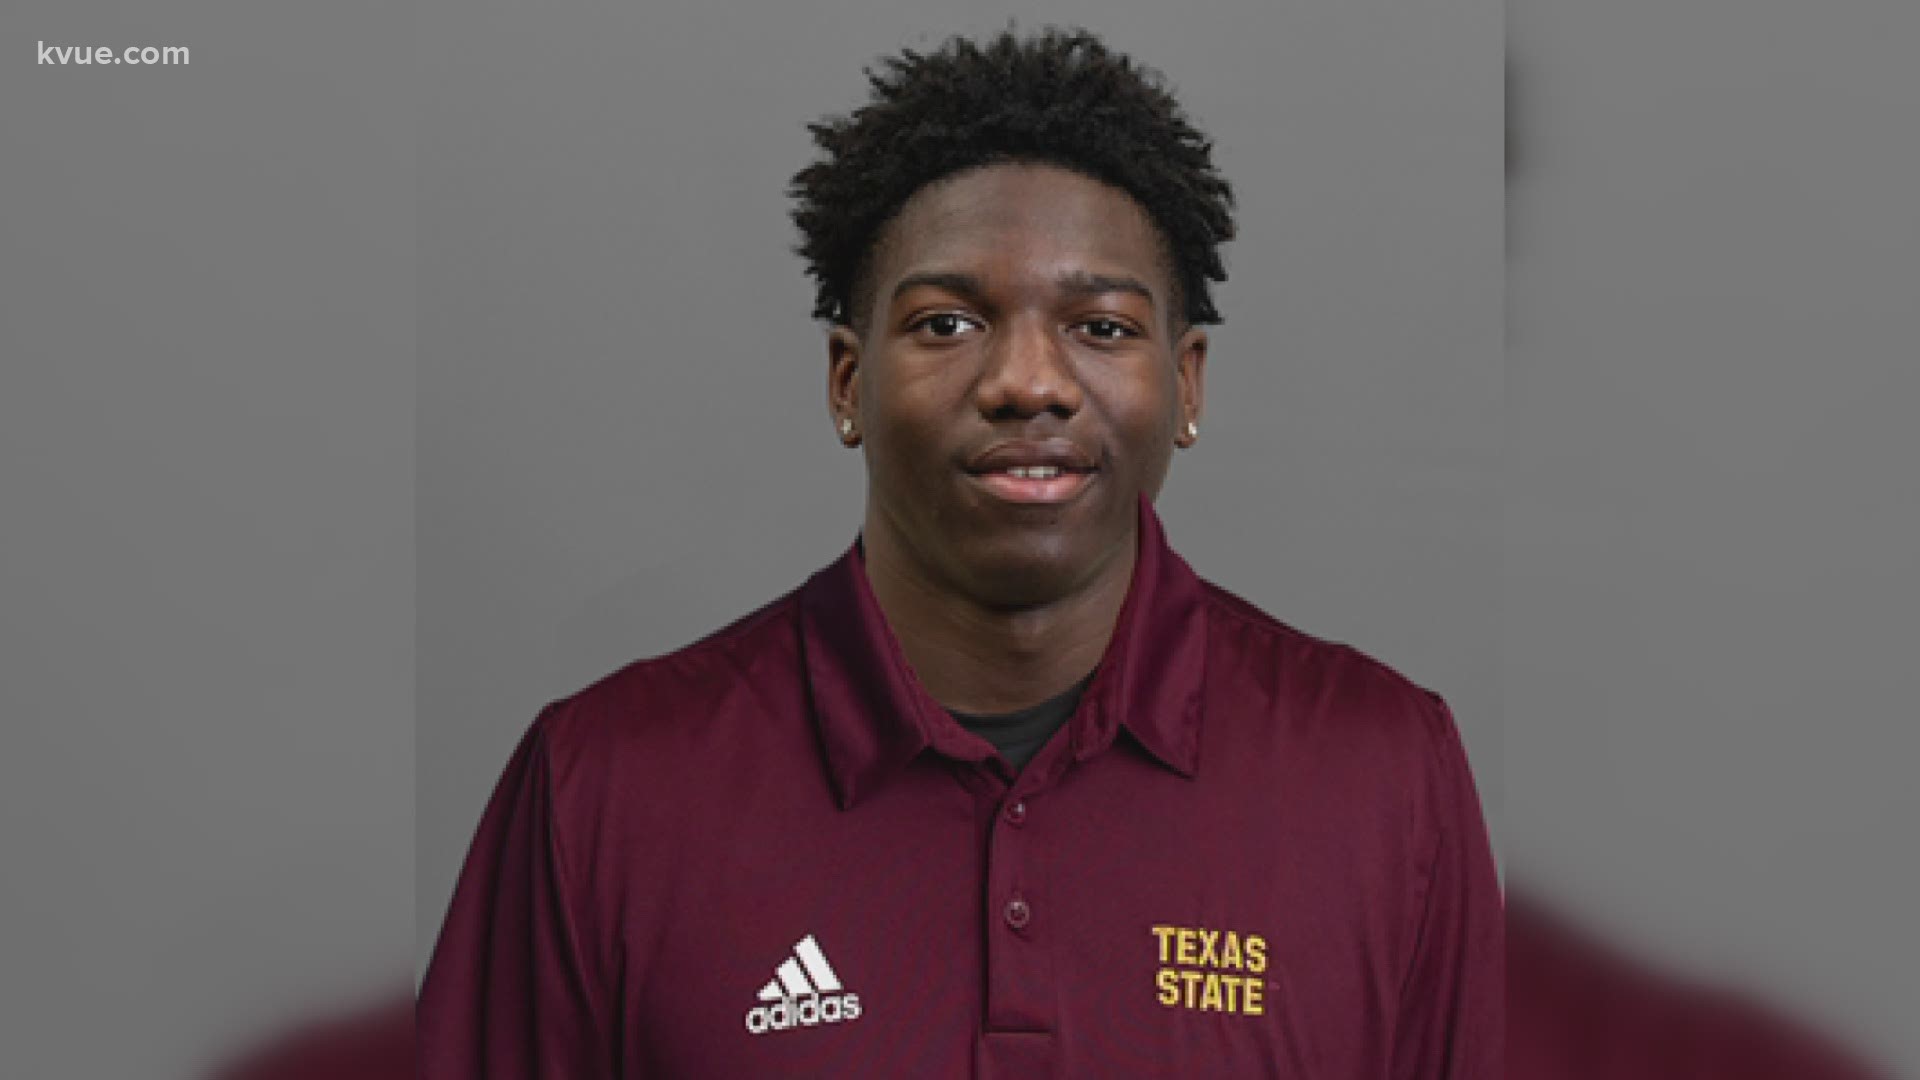 Texas State football player Khambrail Winters was shot and killed in San Marcos on Tuesday night. The incident happened at The Lodge apartments.